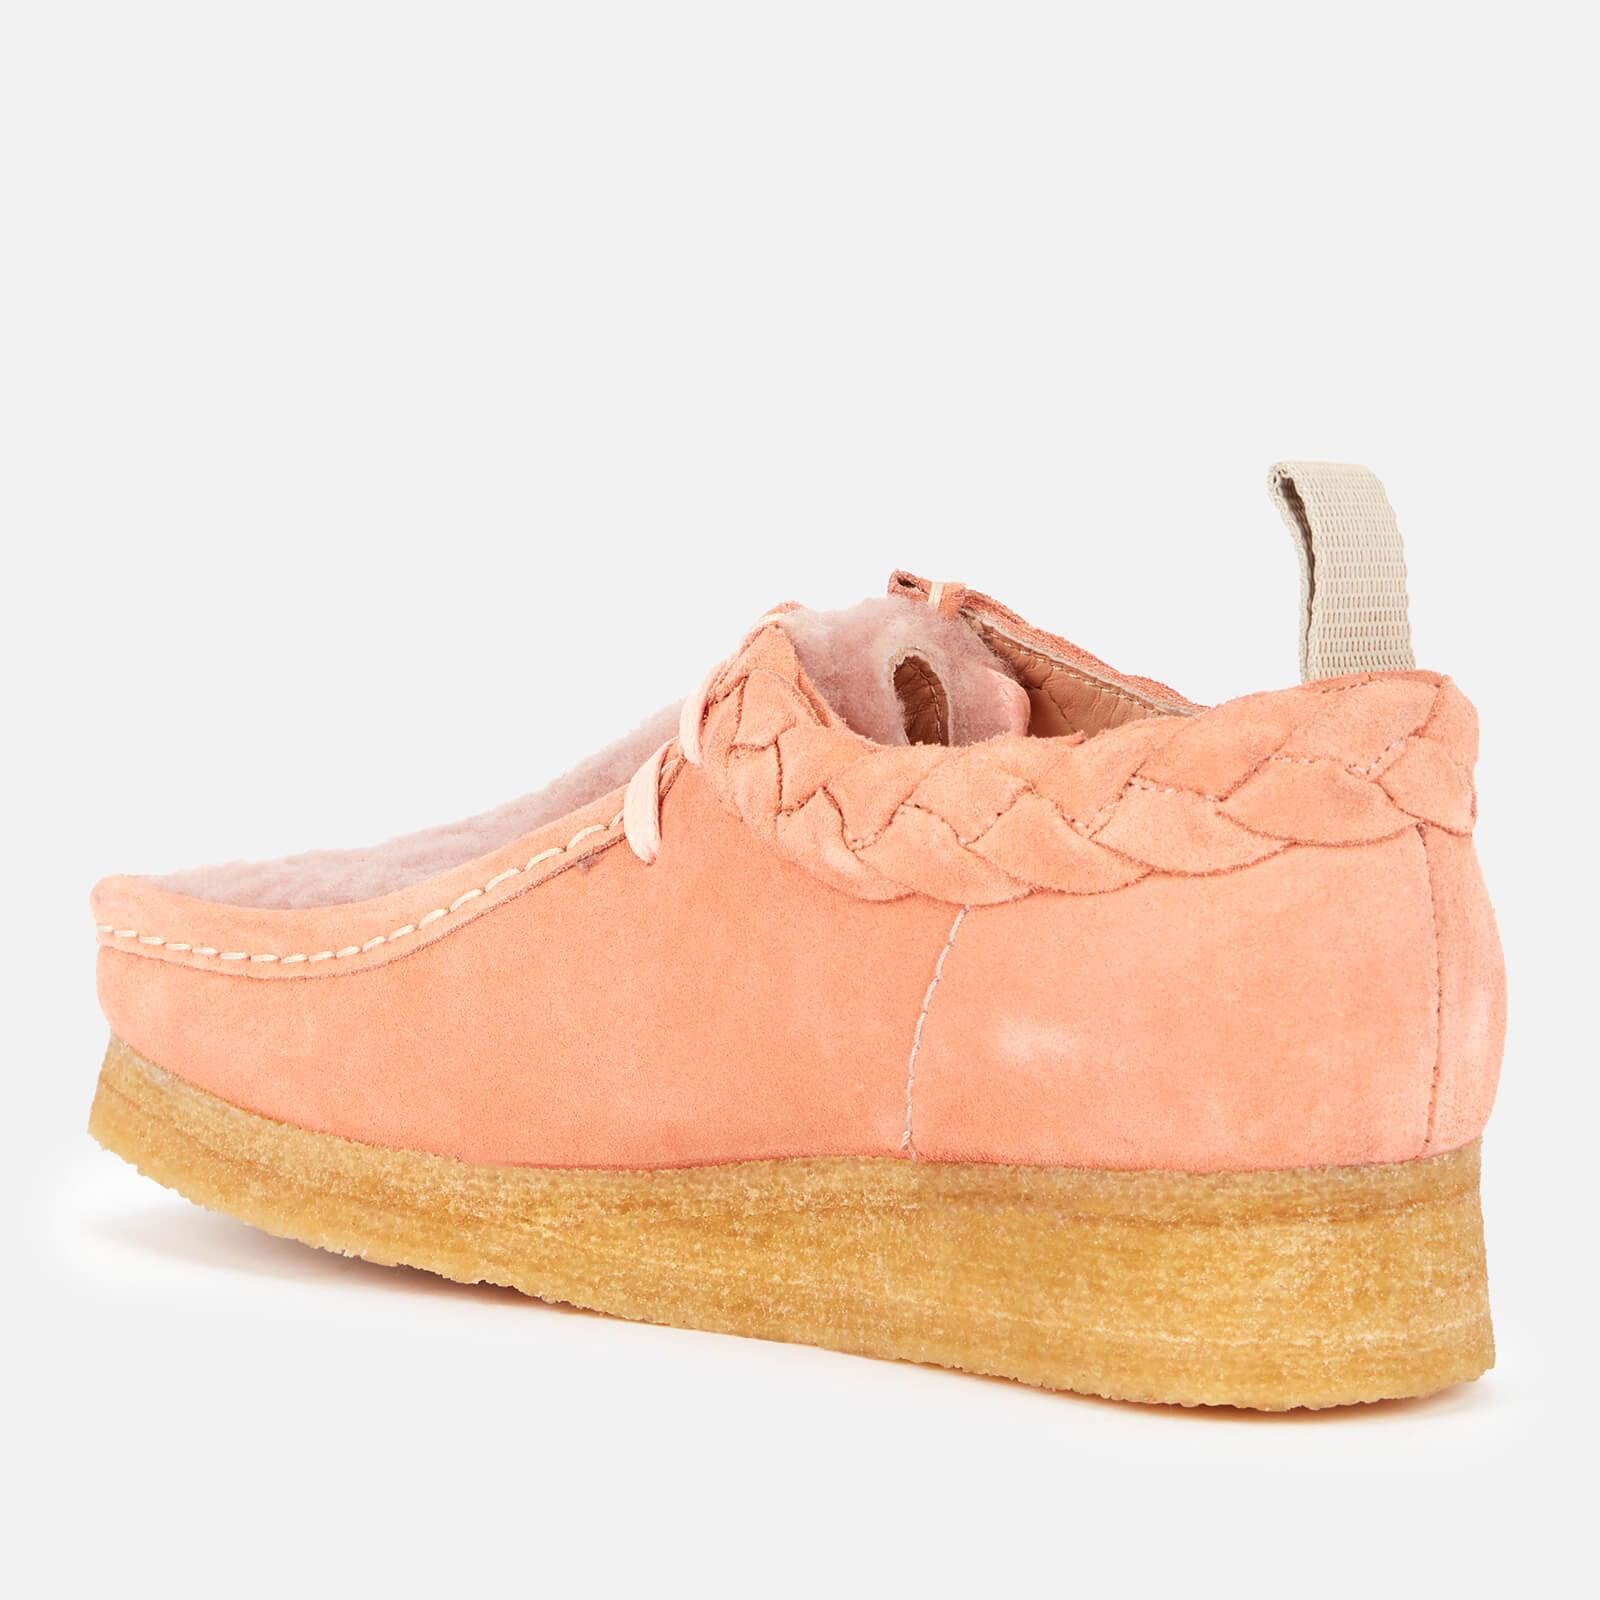 Clarks Suede Wallabee Shoes in Pink - Lyst